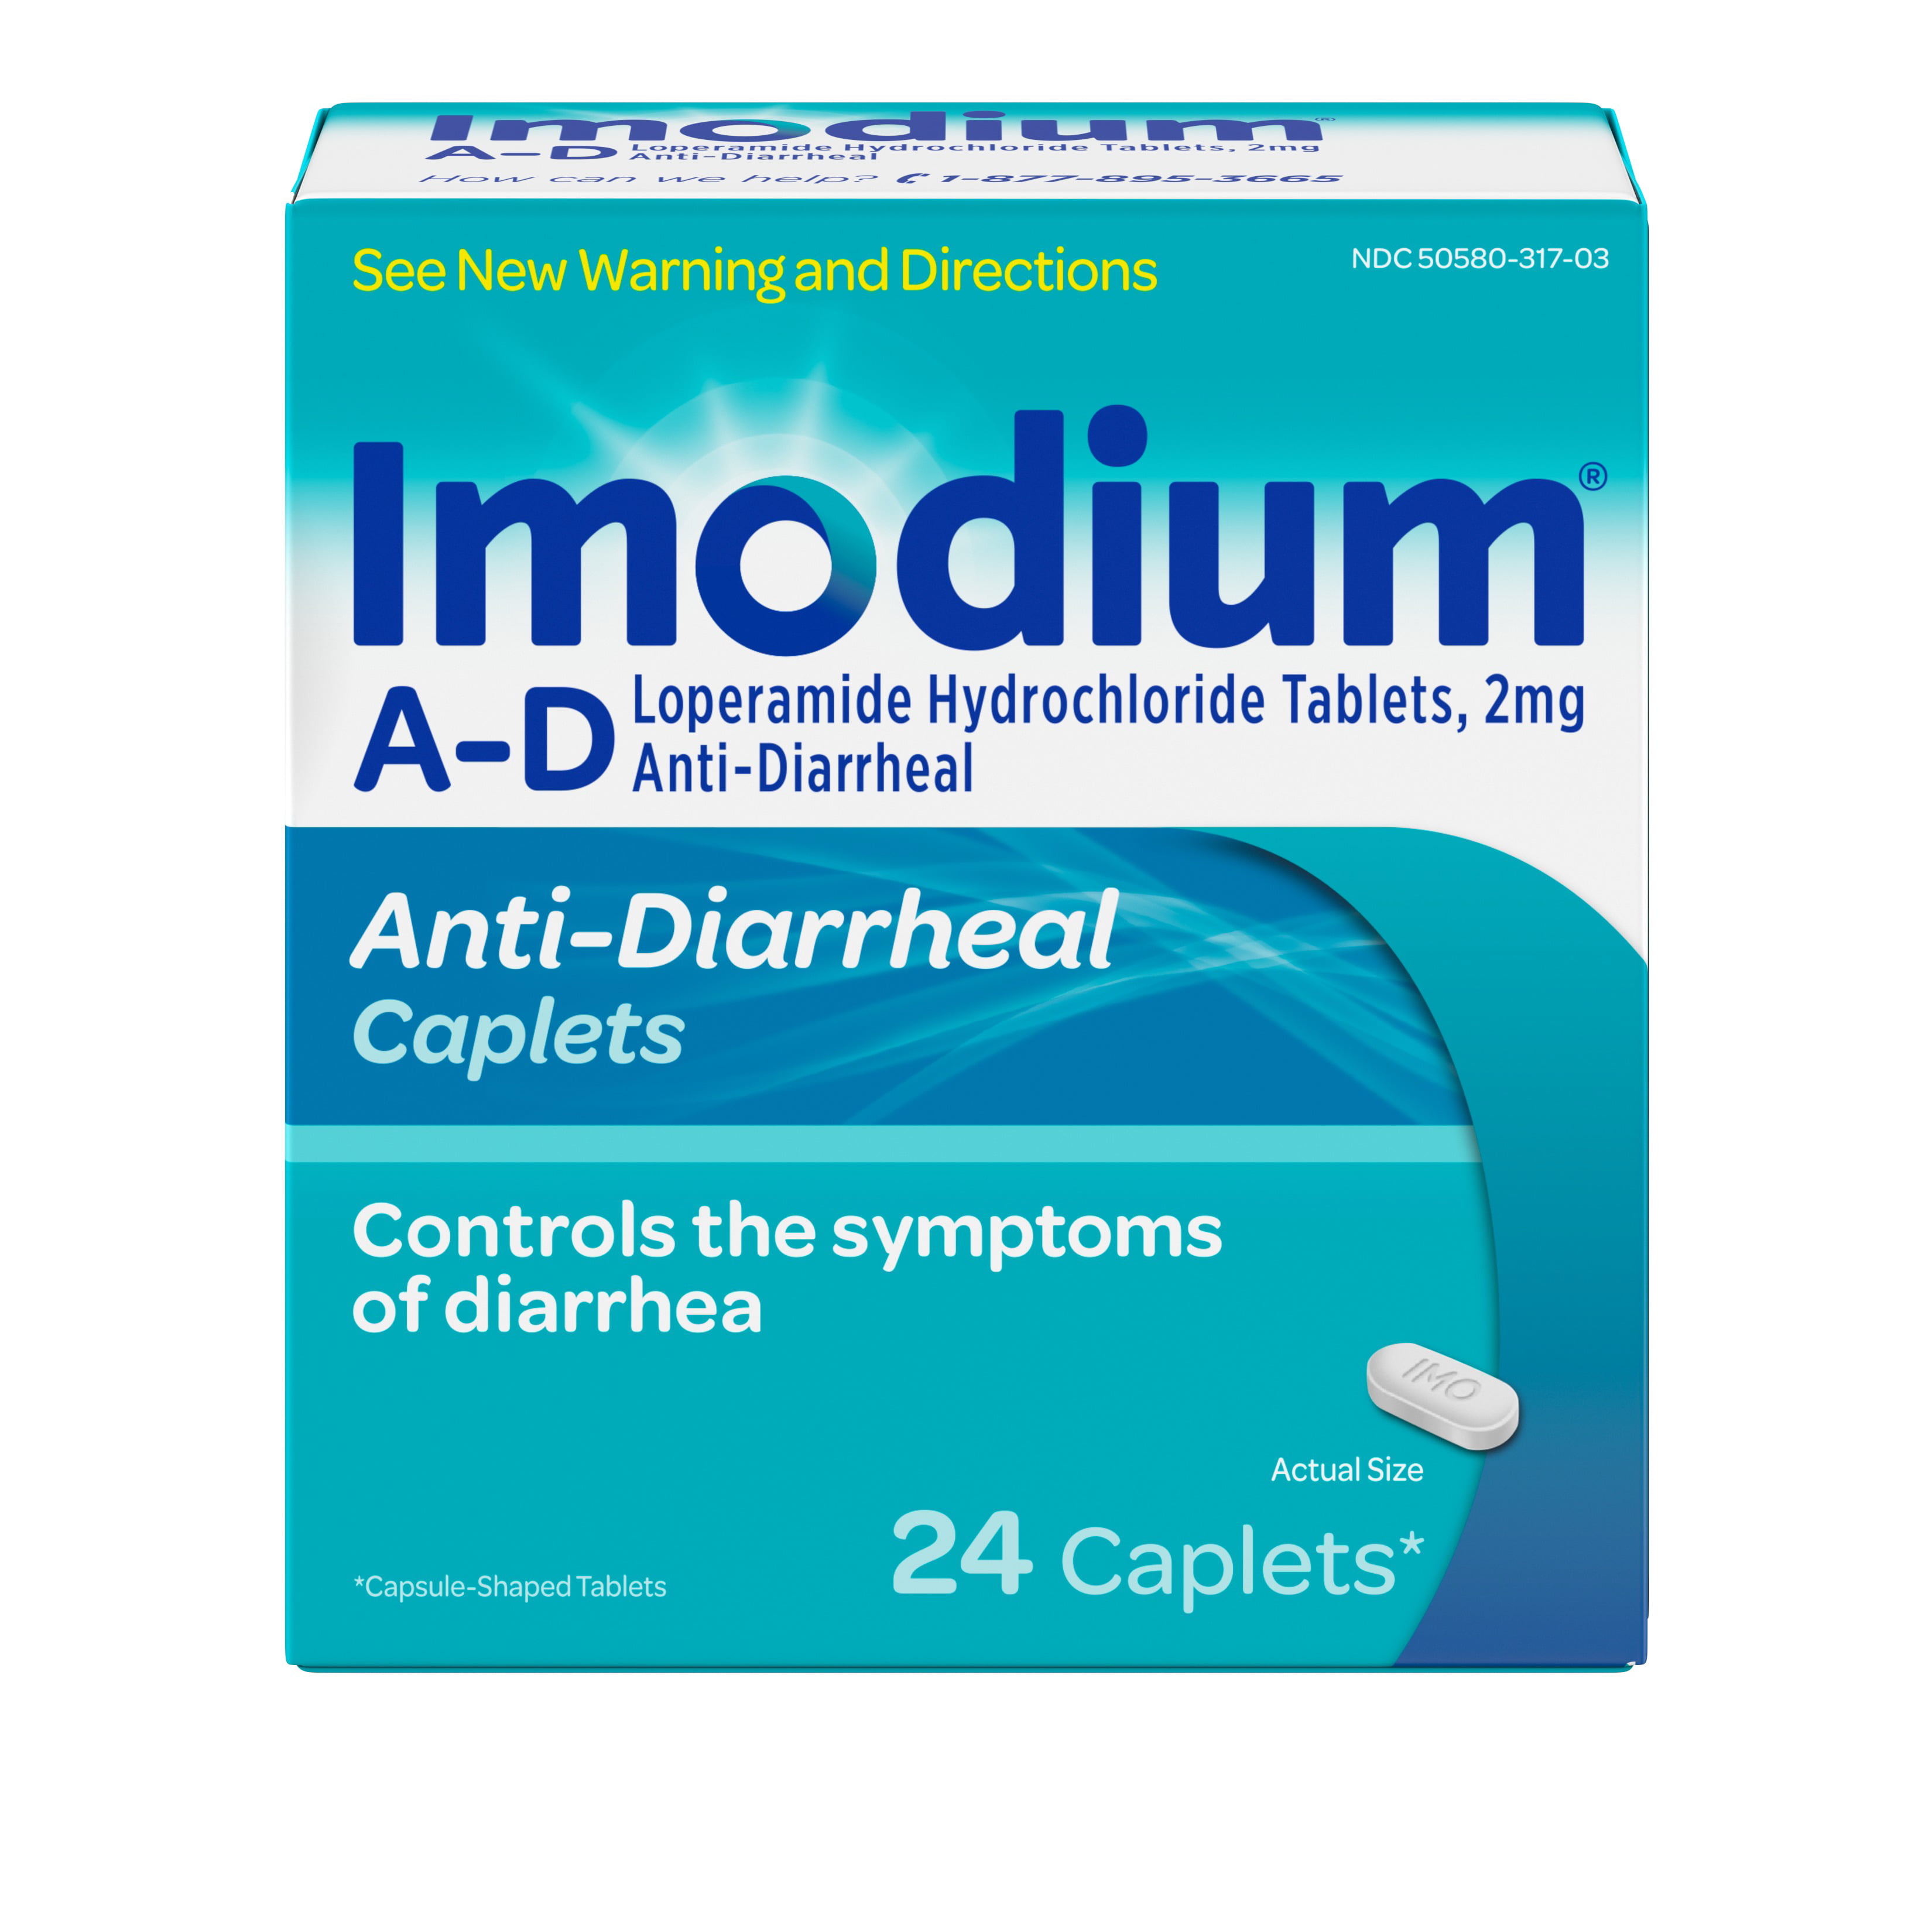 does imodium ad help with diarrhea